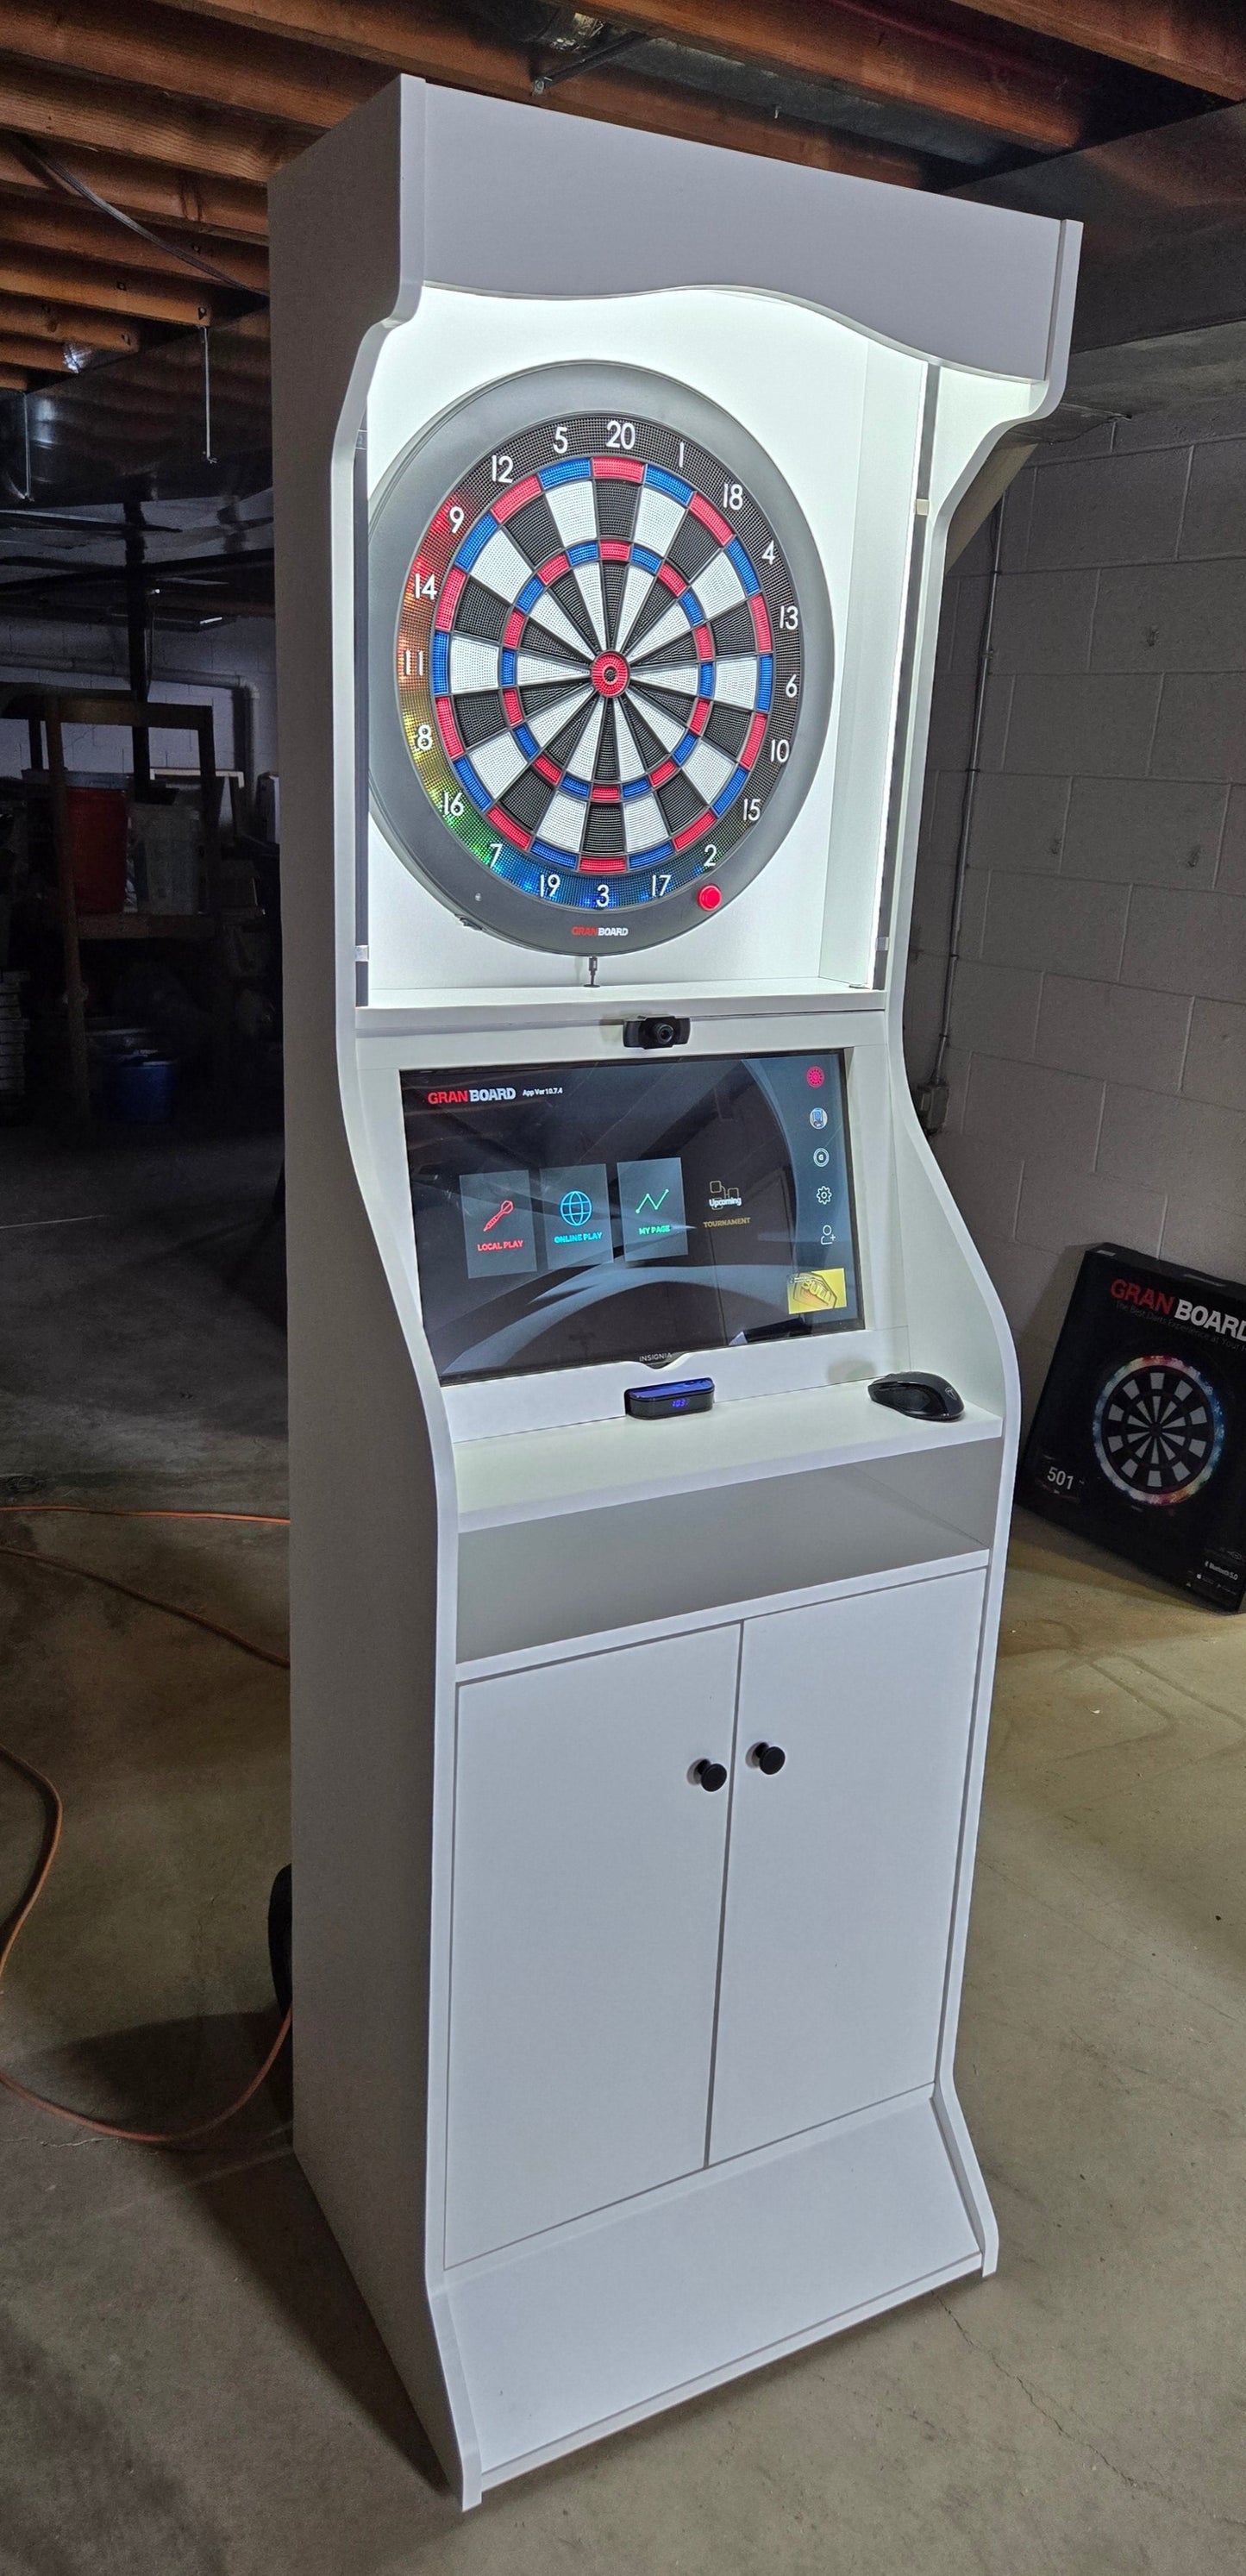 *Grizzly Dart Board Cabinet